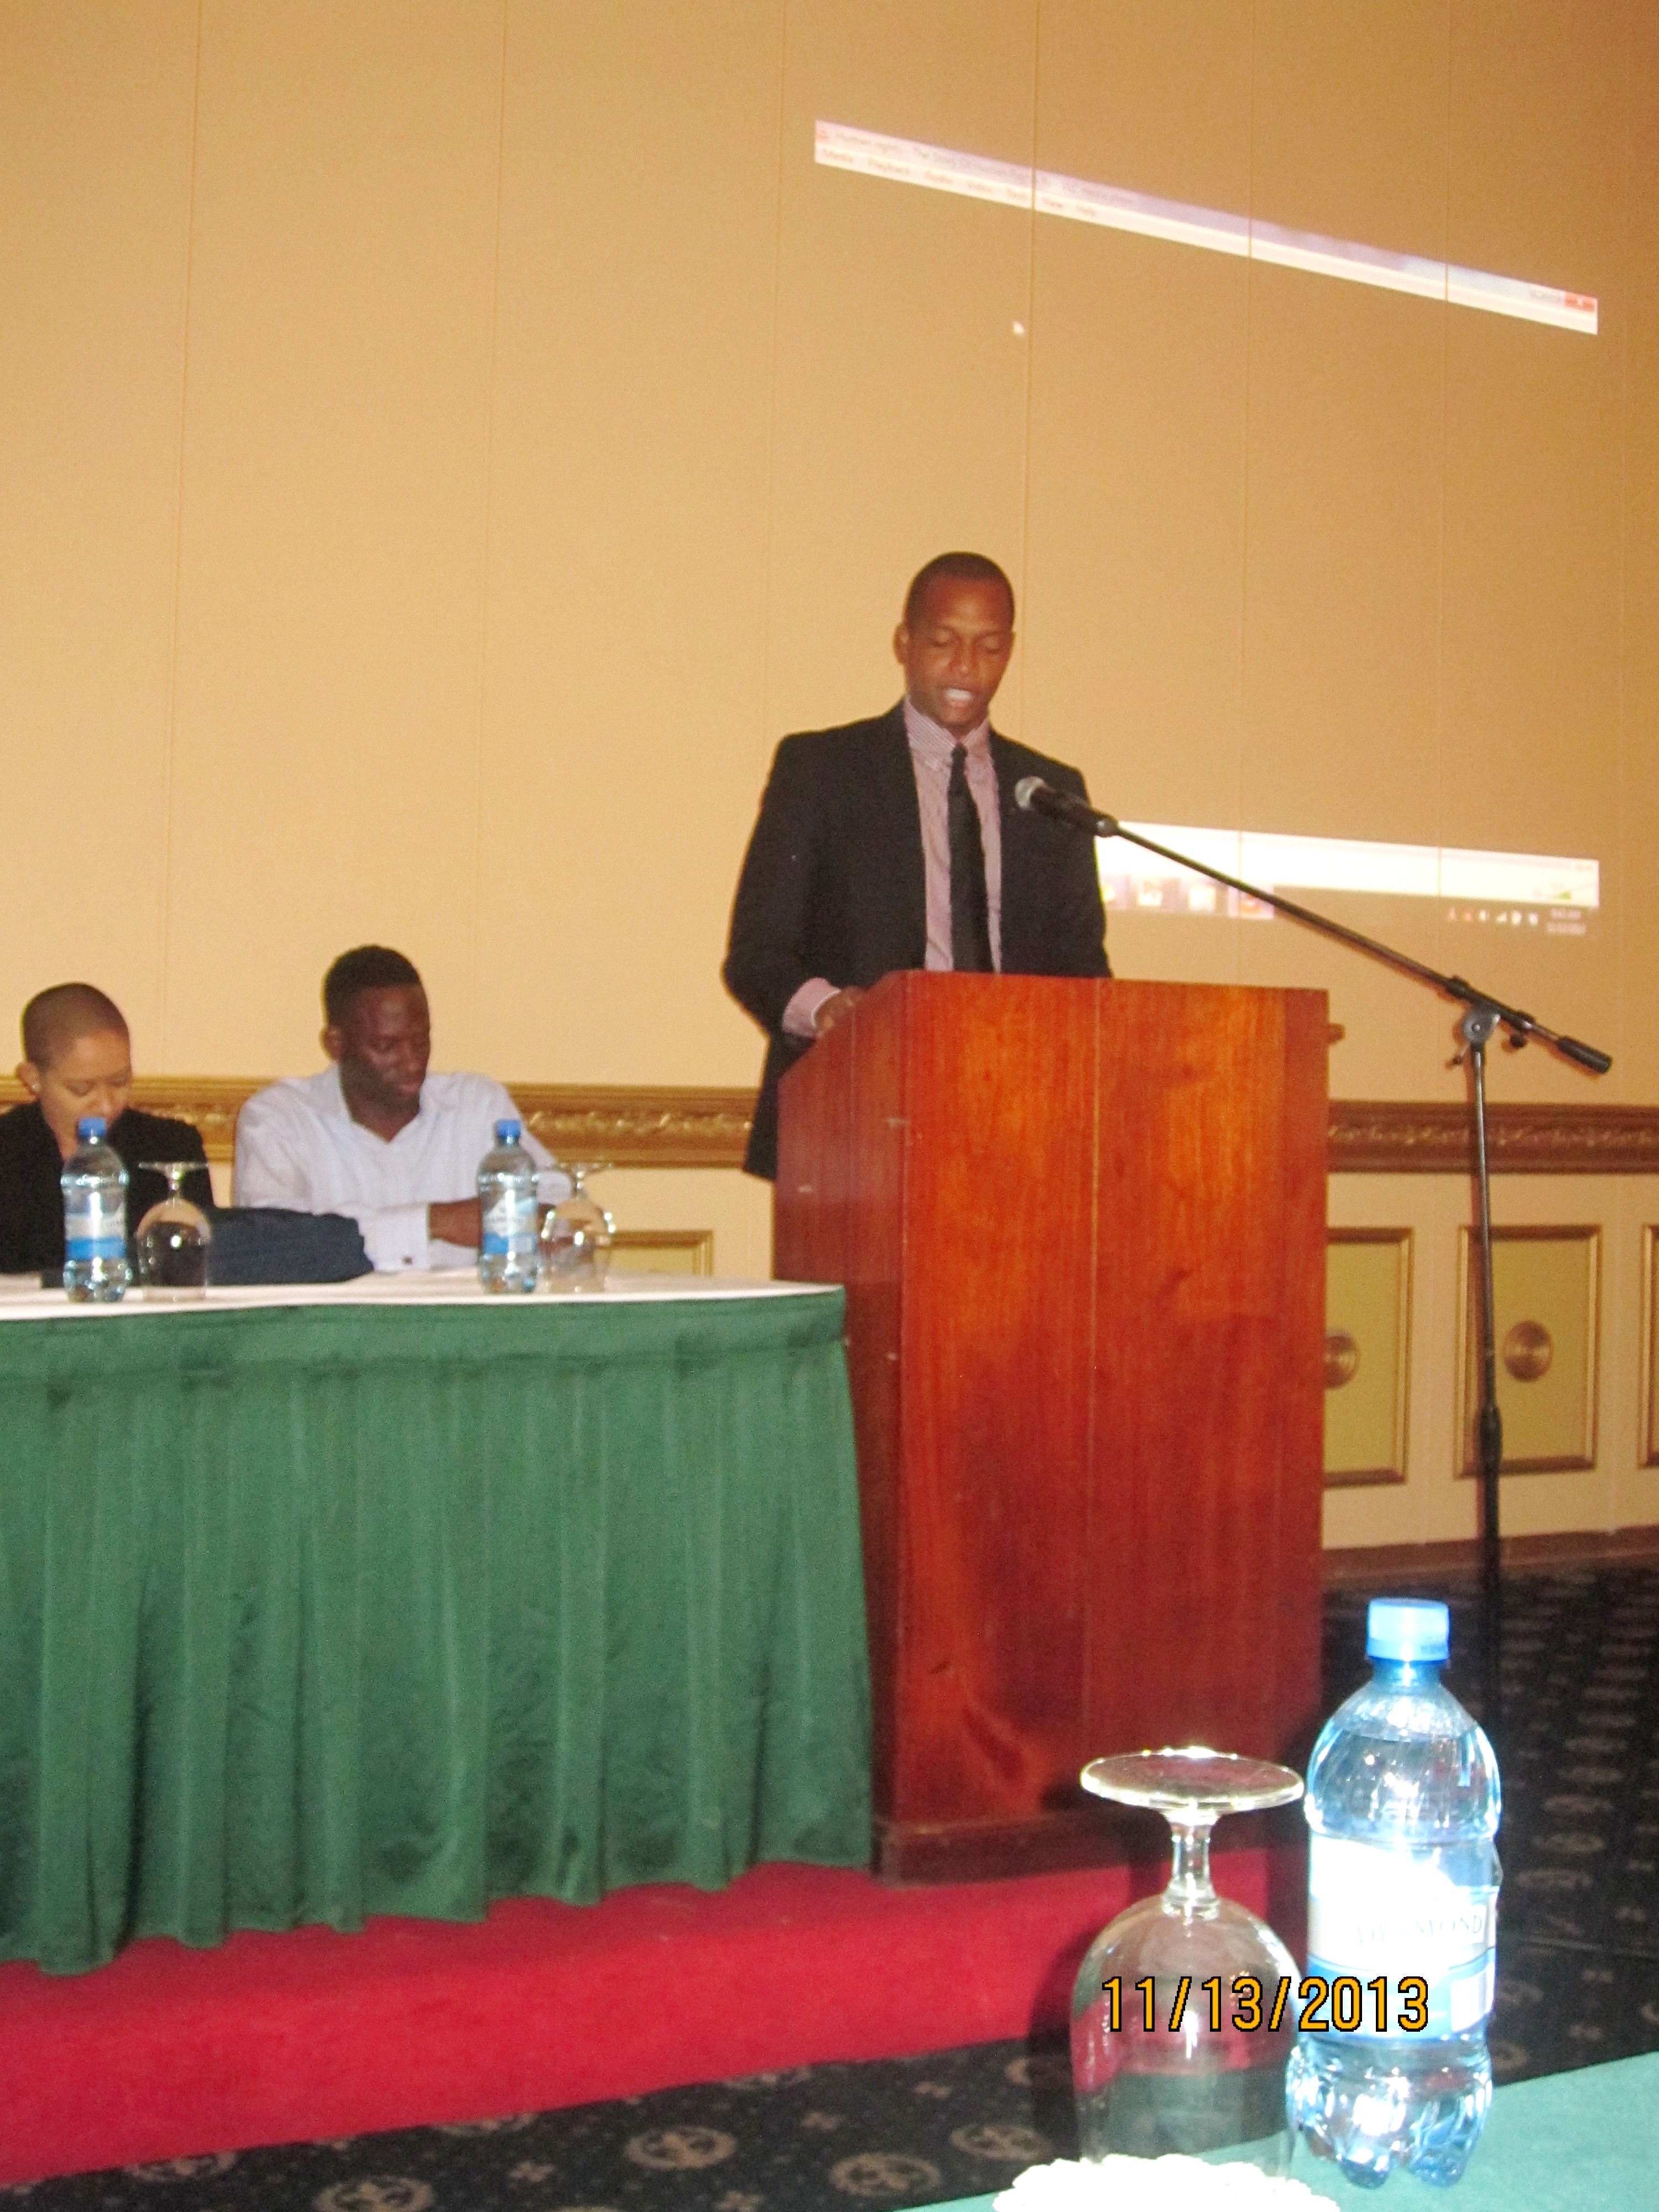 Speech delivered by the President of GCCI at the Business & Human Rights Seminar